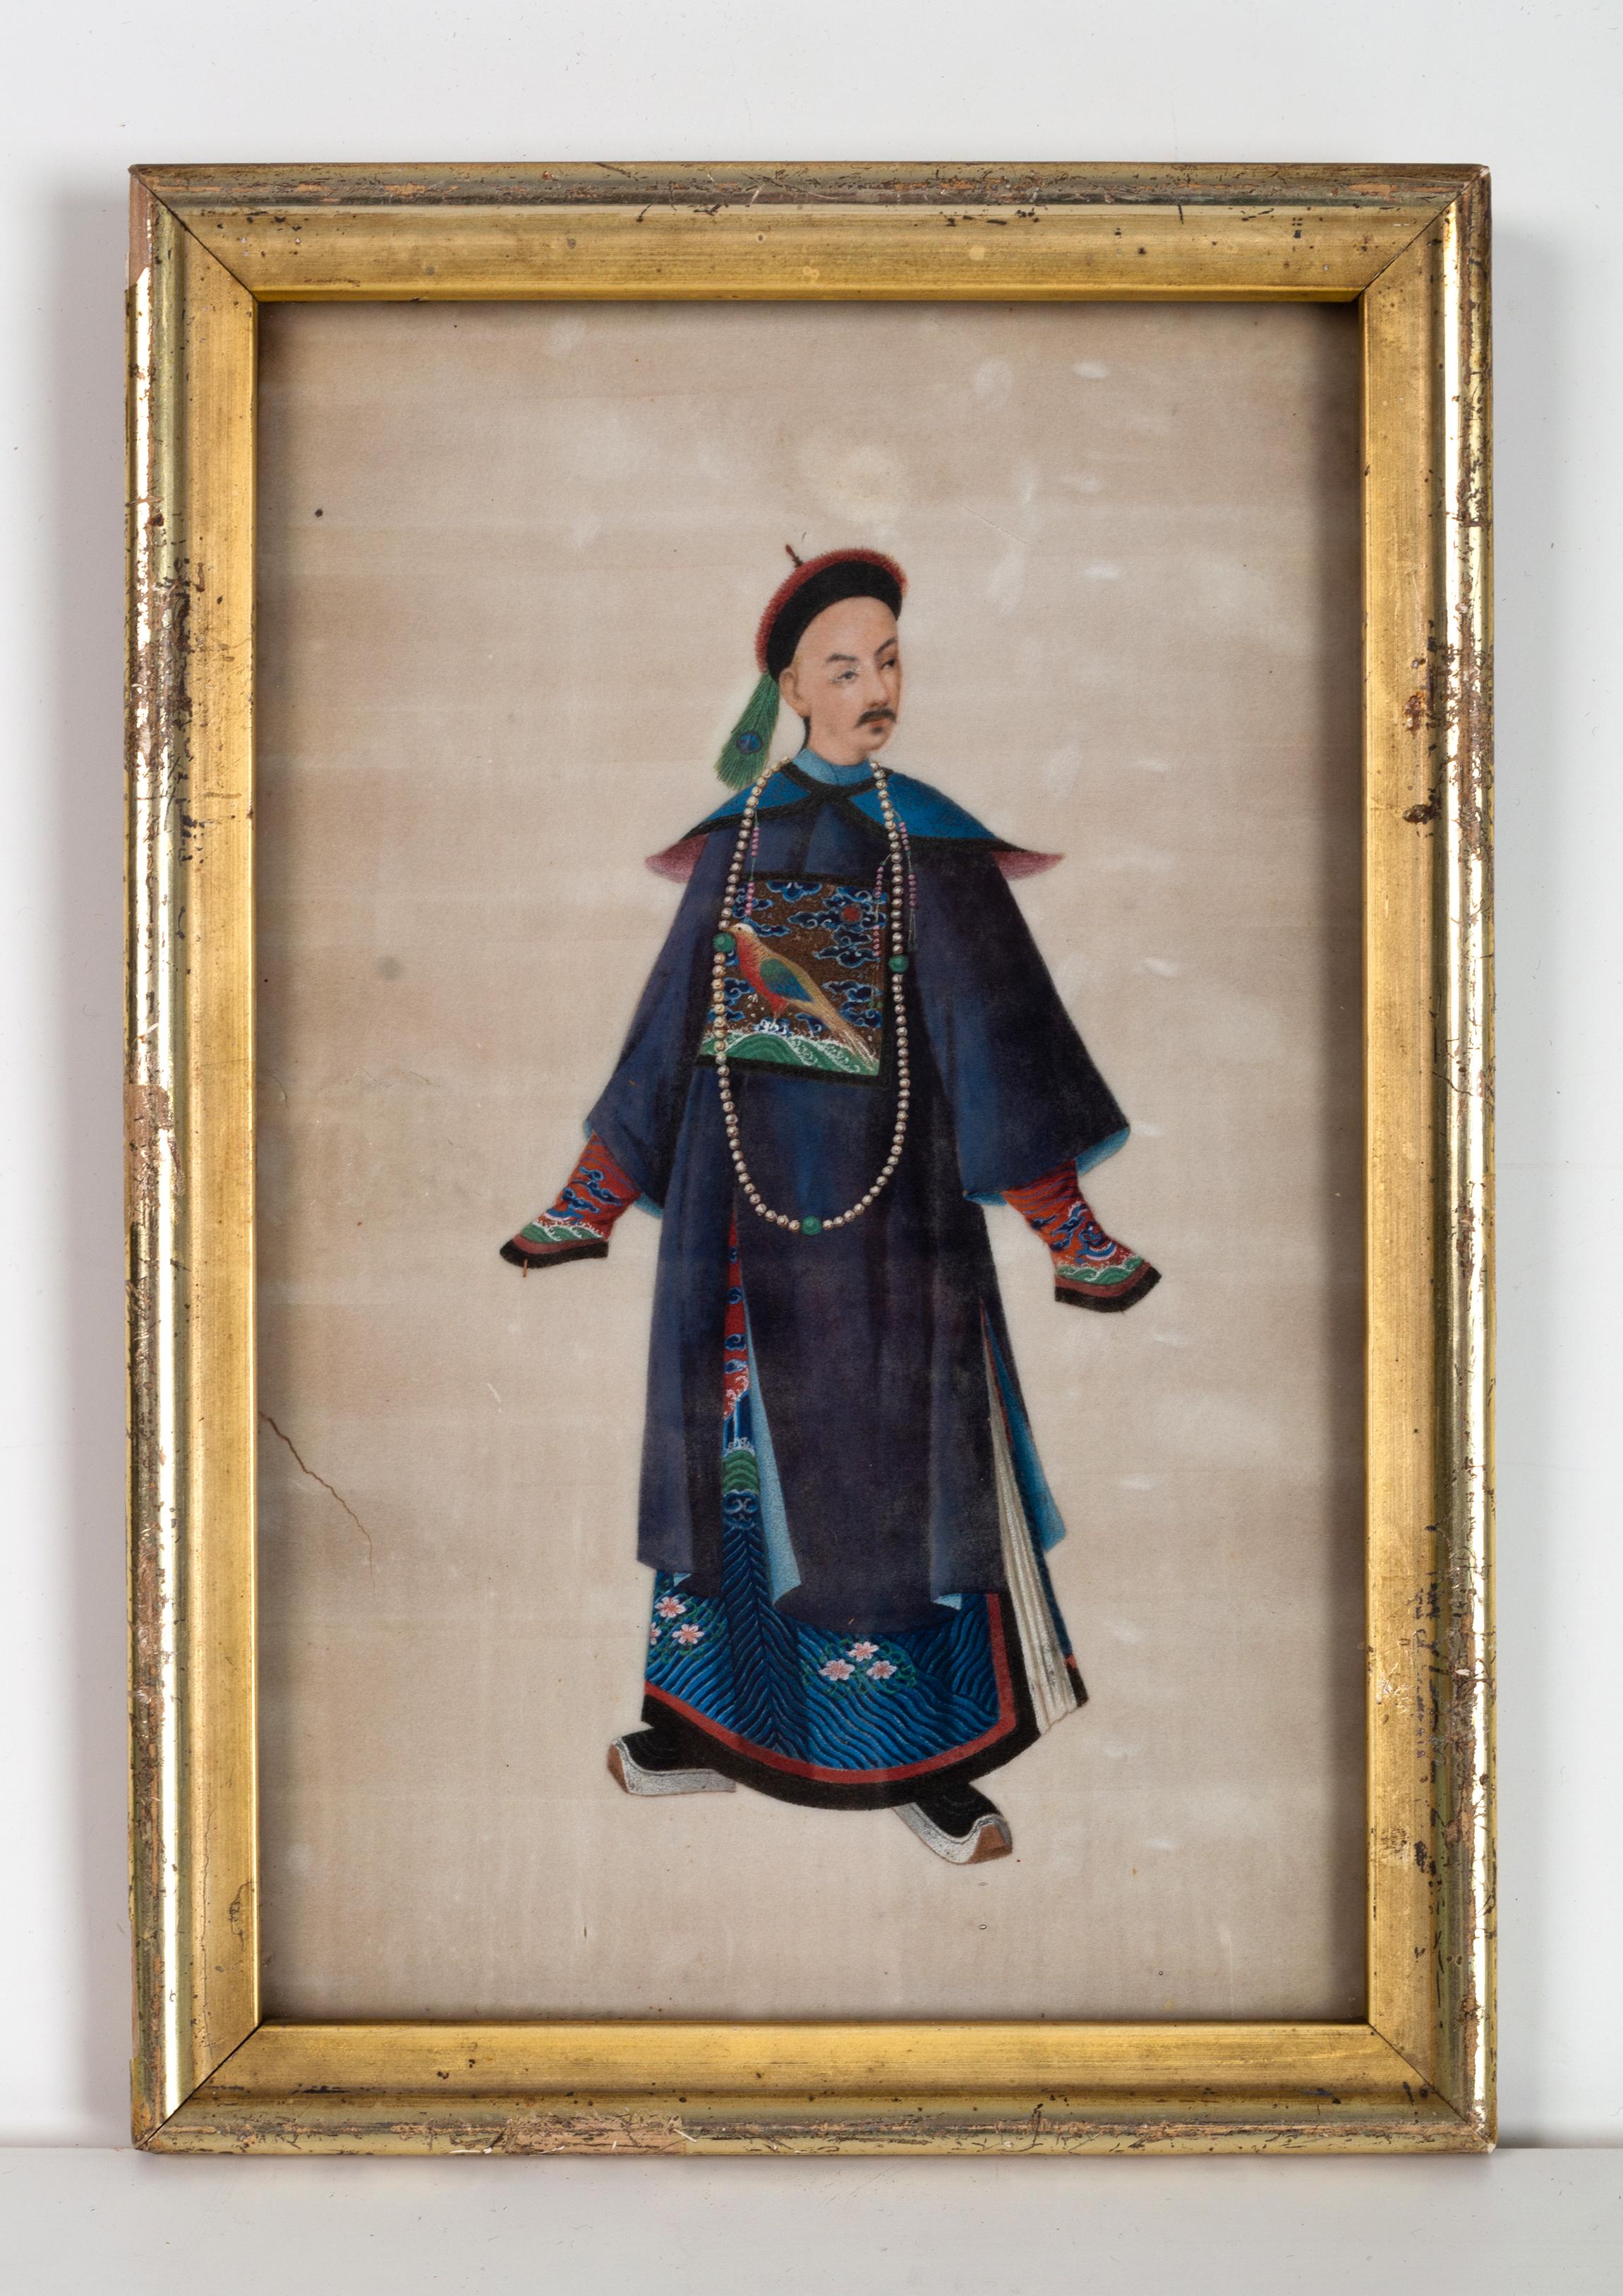 A Collection of Five 19th Century Chinese Export Gouache Portraits on Pith Paper
C.1850
Depicting Court Figures in Imperial Dress
Framed and glazed
Superb collection
In very good condition with expected signs of wear commensurate with age. Wear to